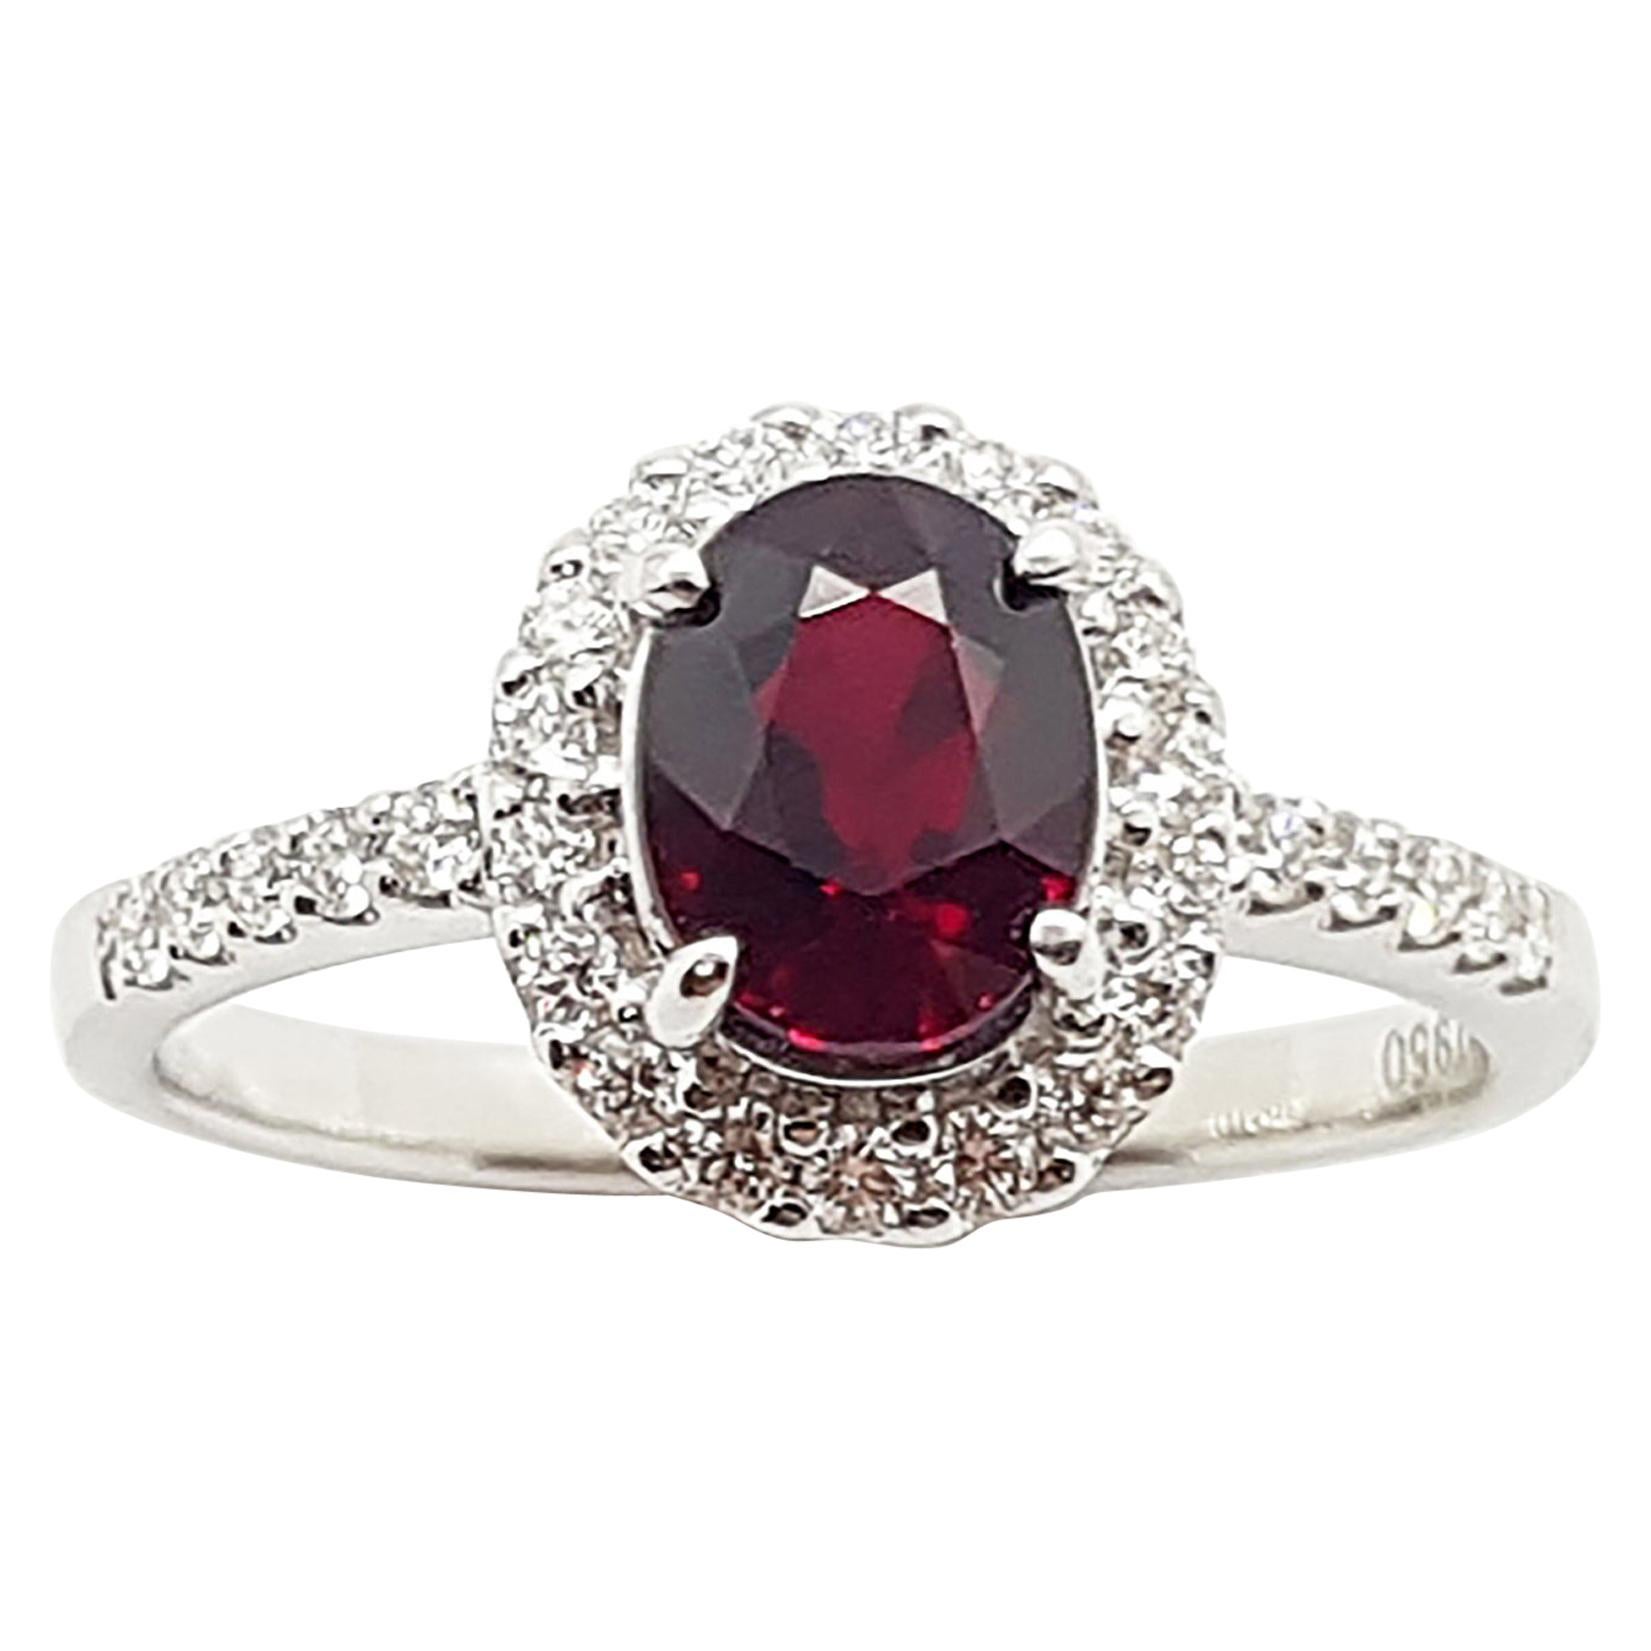 Certified Unheated Ruby with Diamond Ring Set in Platinum 950 Settings